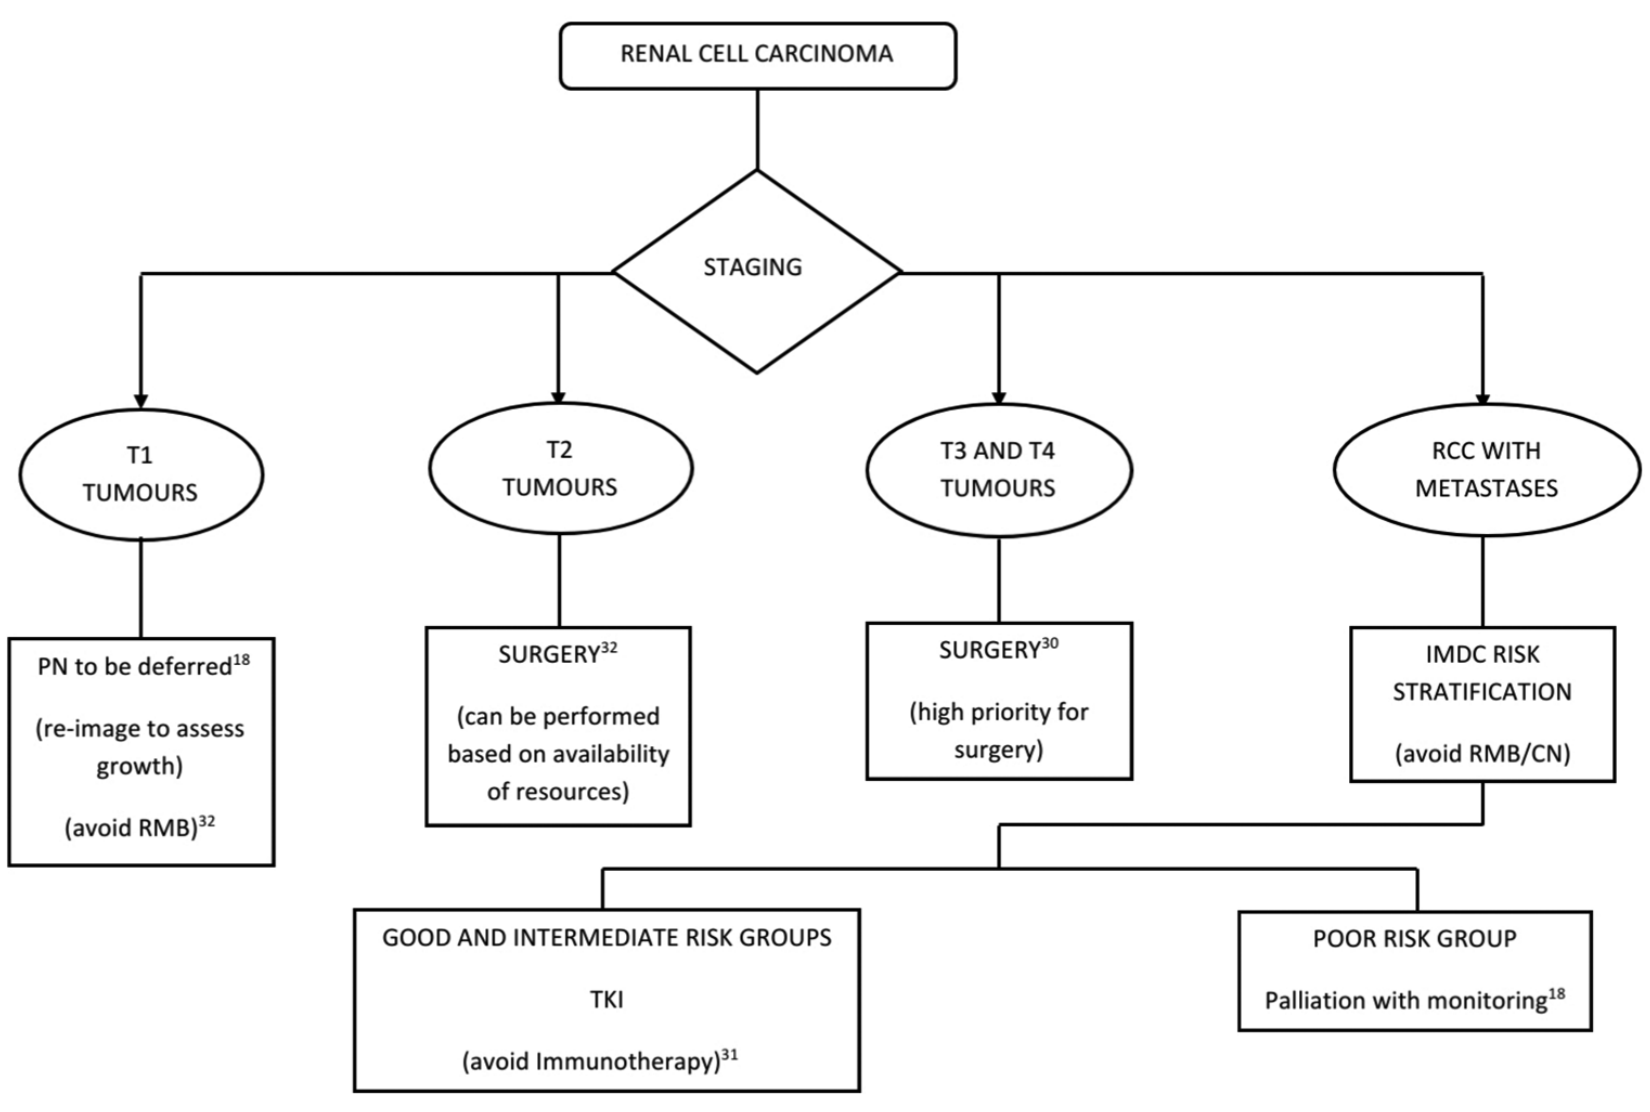 Algorithm for management of renal cell carcinoma in the COVID 19 pandemic 1